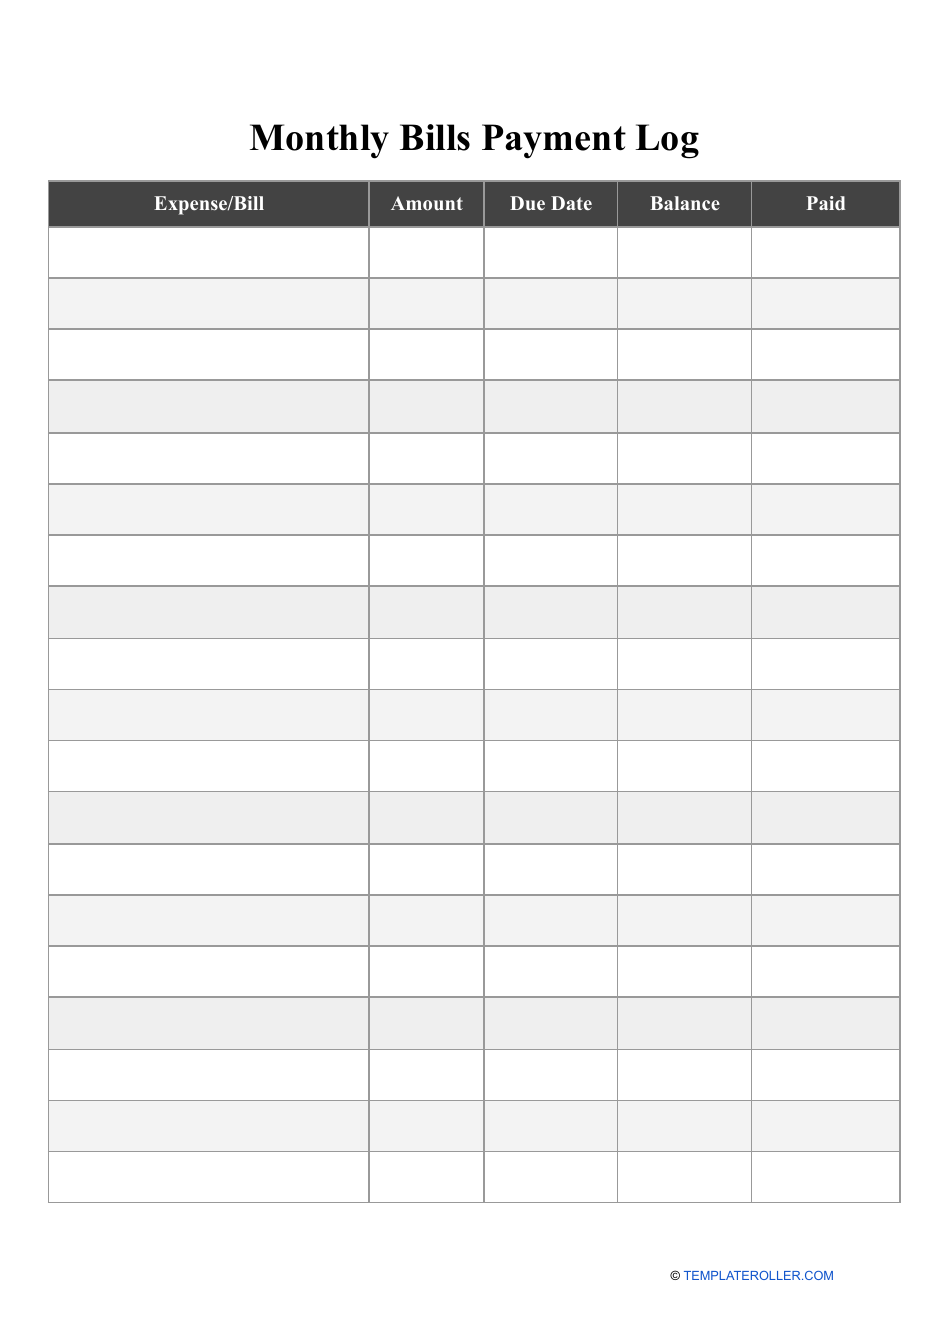 Monthly Bill Payment Log Free Printable